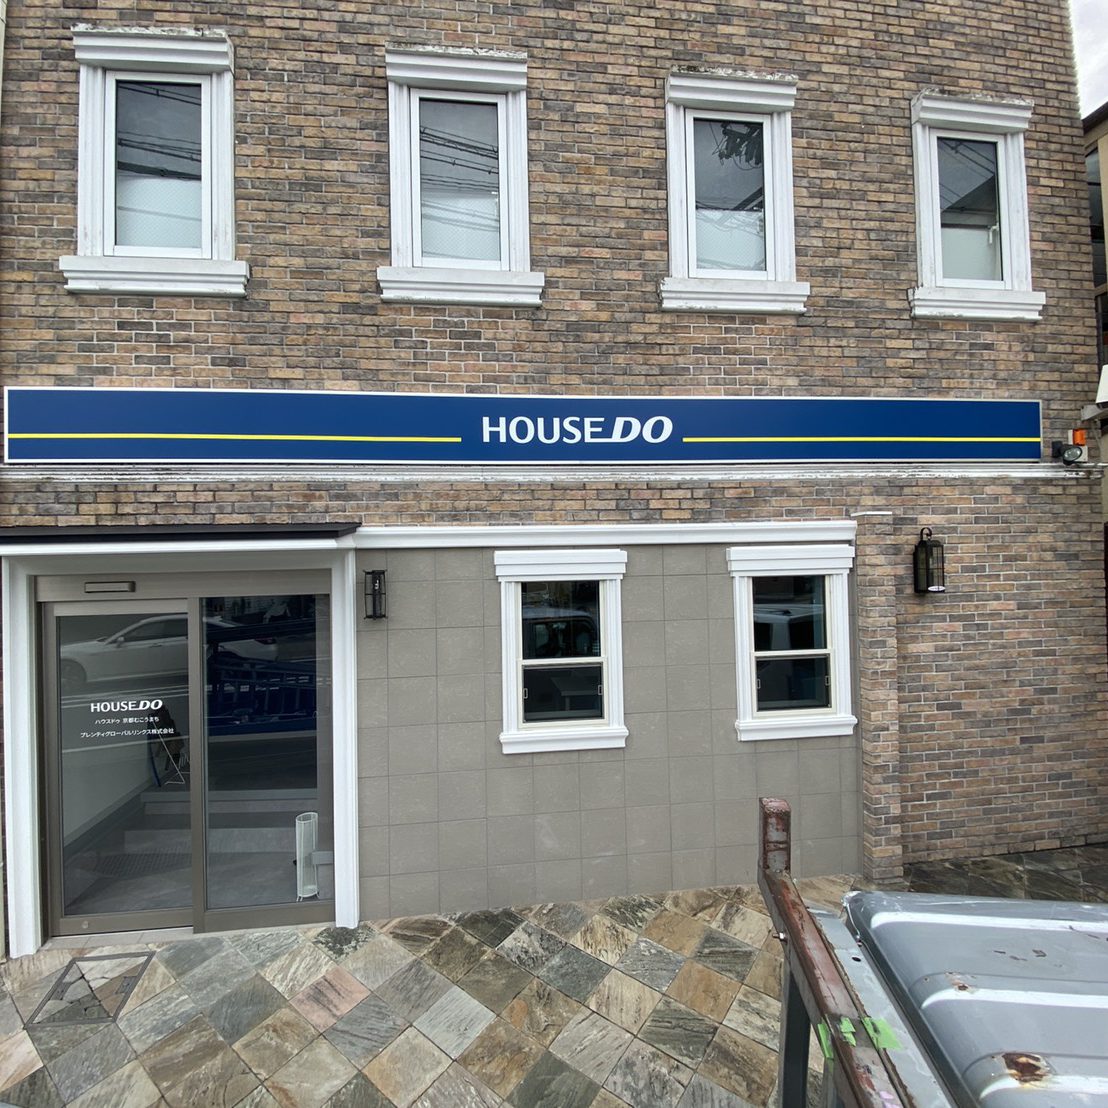 HOUSE DO 京都むこうまち店様の施工事例